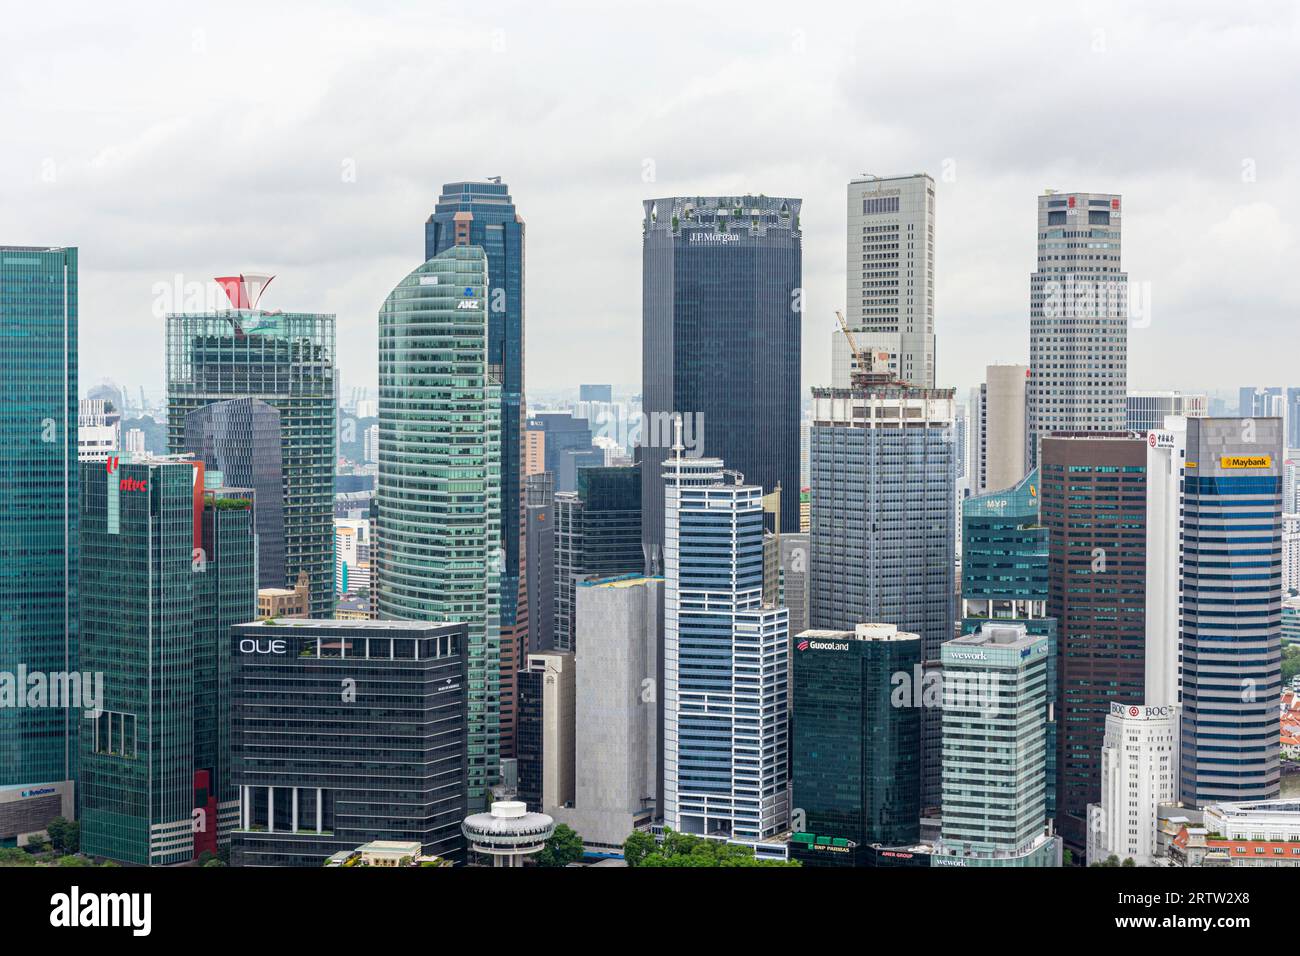 The skyscraper city of the Downtown Core financial centre buildings, Singapore Stock Photo